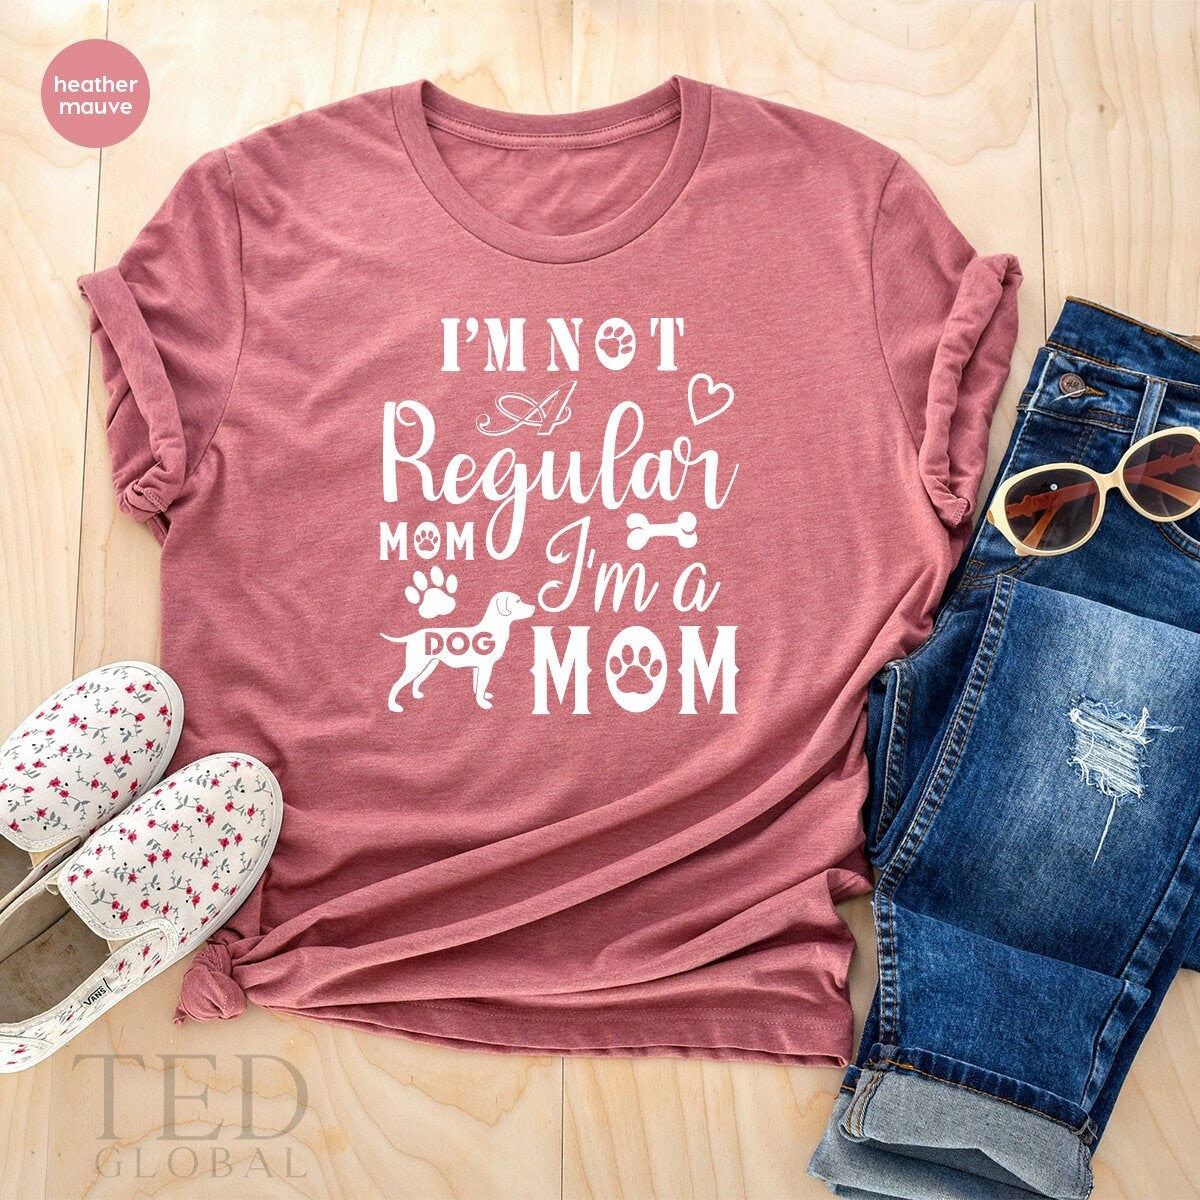 Dog Mom T-Shirt, Dog Lover T Shirt, Personalized Pet Mom TShirt, Mothers Day Shirts, Dog Owner Gift, Dog Mama Hoodies, Dog Shirt For Women - Fastdeliverytees.com